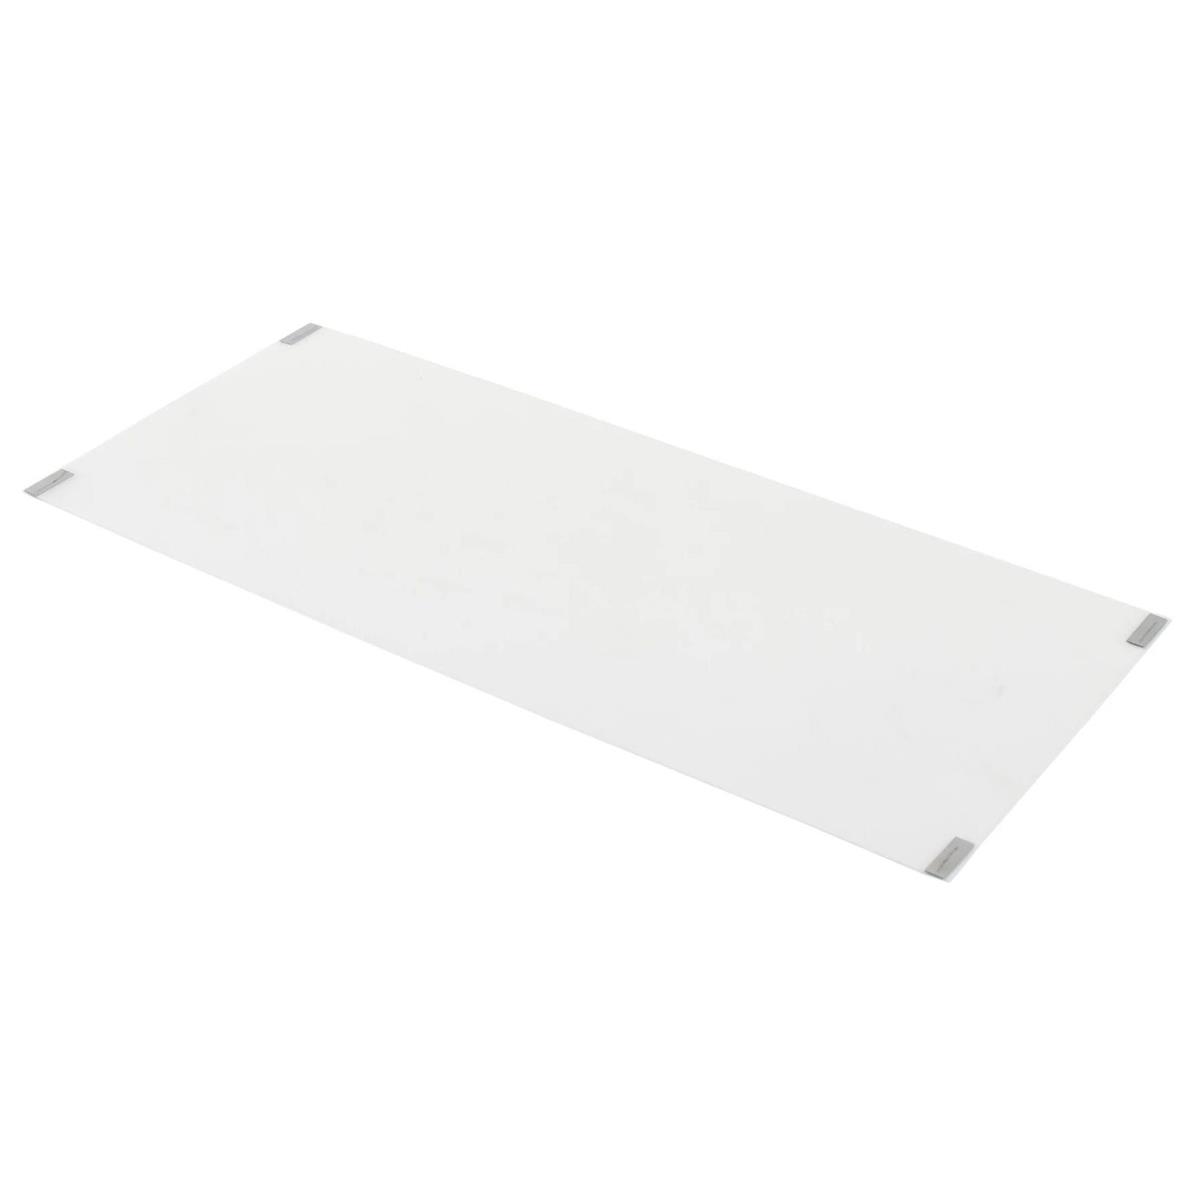 

K 5600 Lighting Diffusion with Magnetic Corners for 2x1' Slice LED Panel